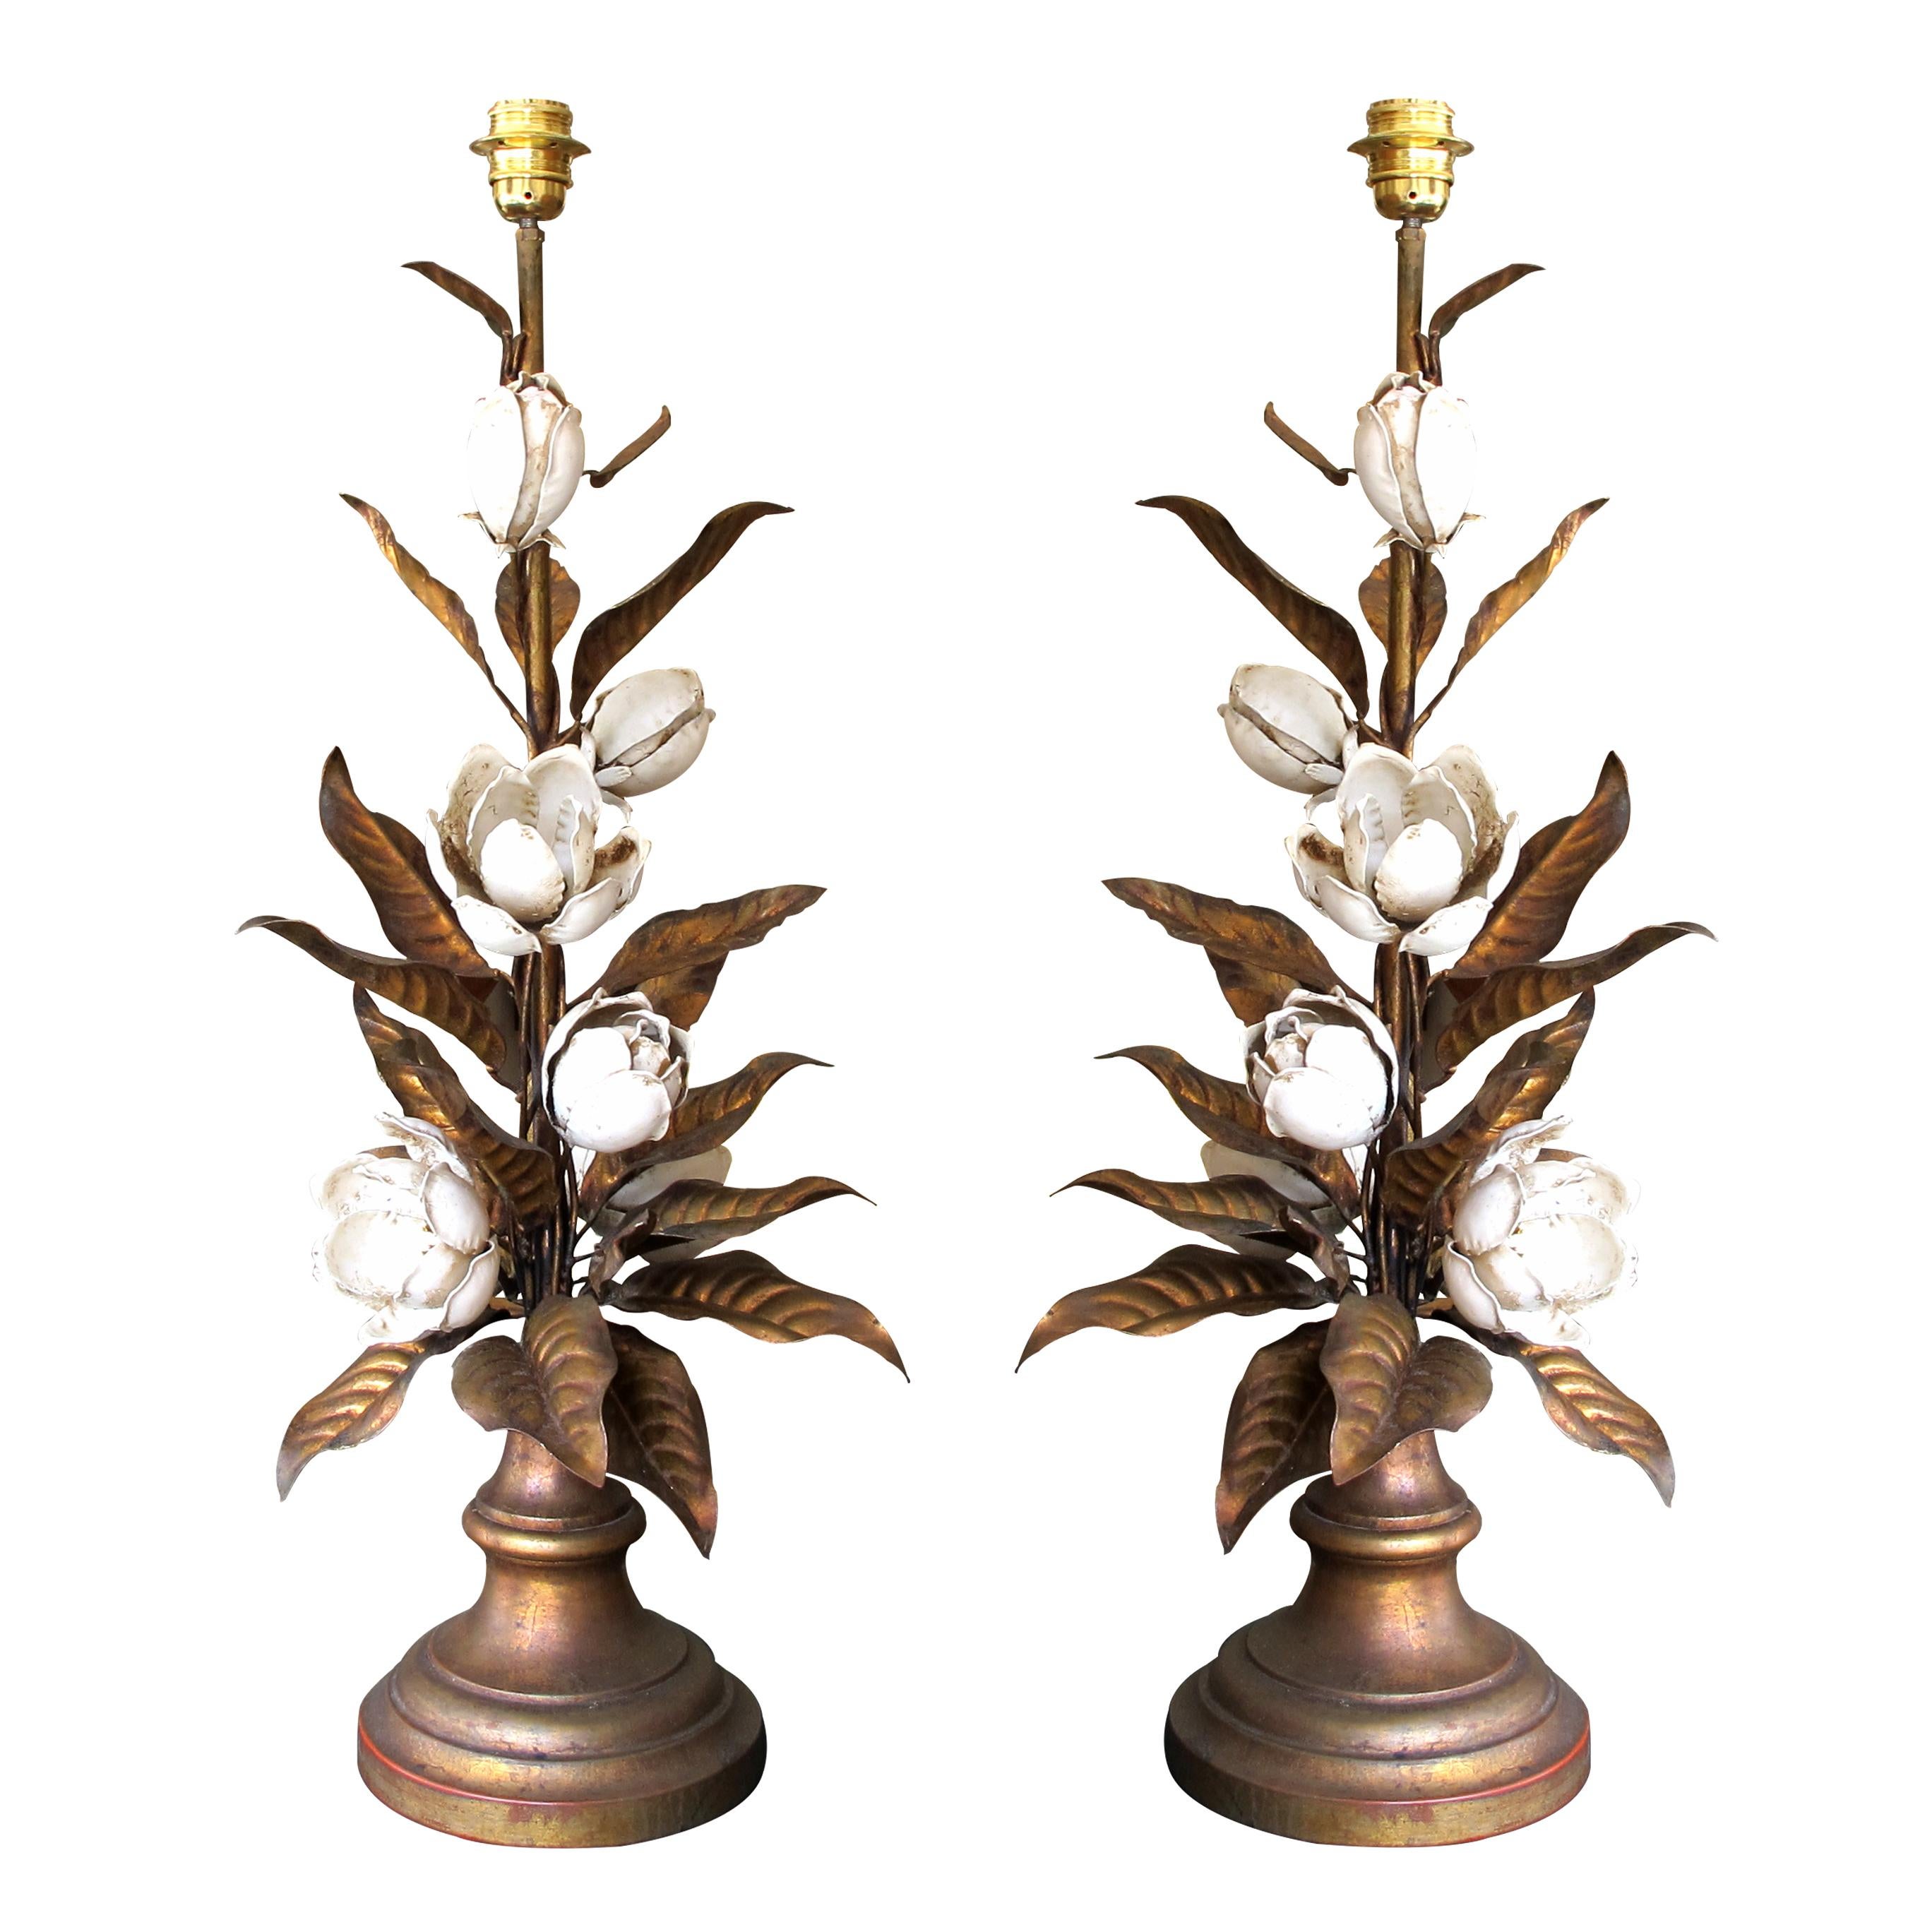 Pair of rare large, mid century, Italian highly-decorative floral toleware table lamps with bronze-coloured leaves and white painted flowers. Each lamp has been handcrafted individually with the flowers positioned in different places on each lamp.